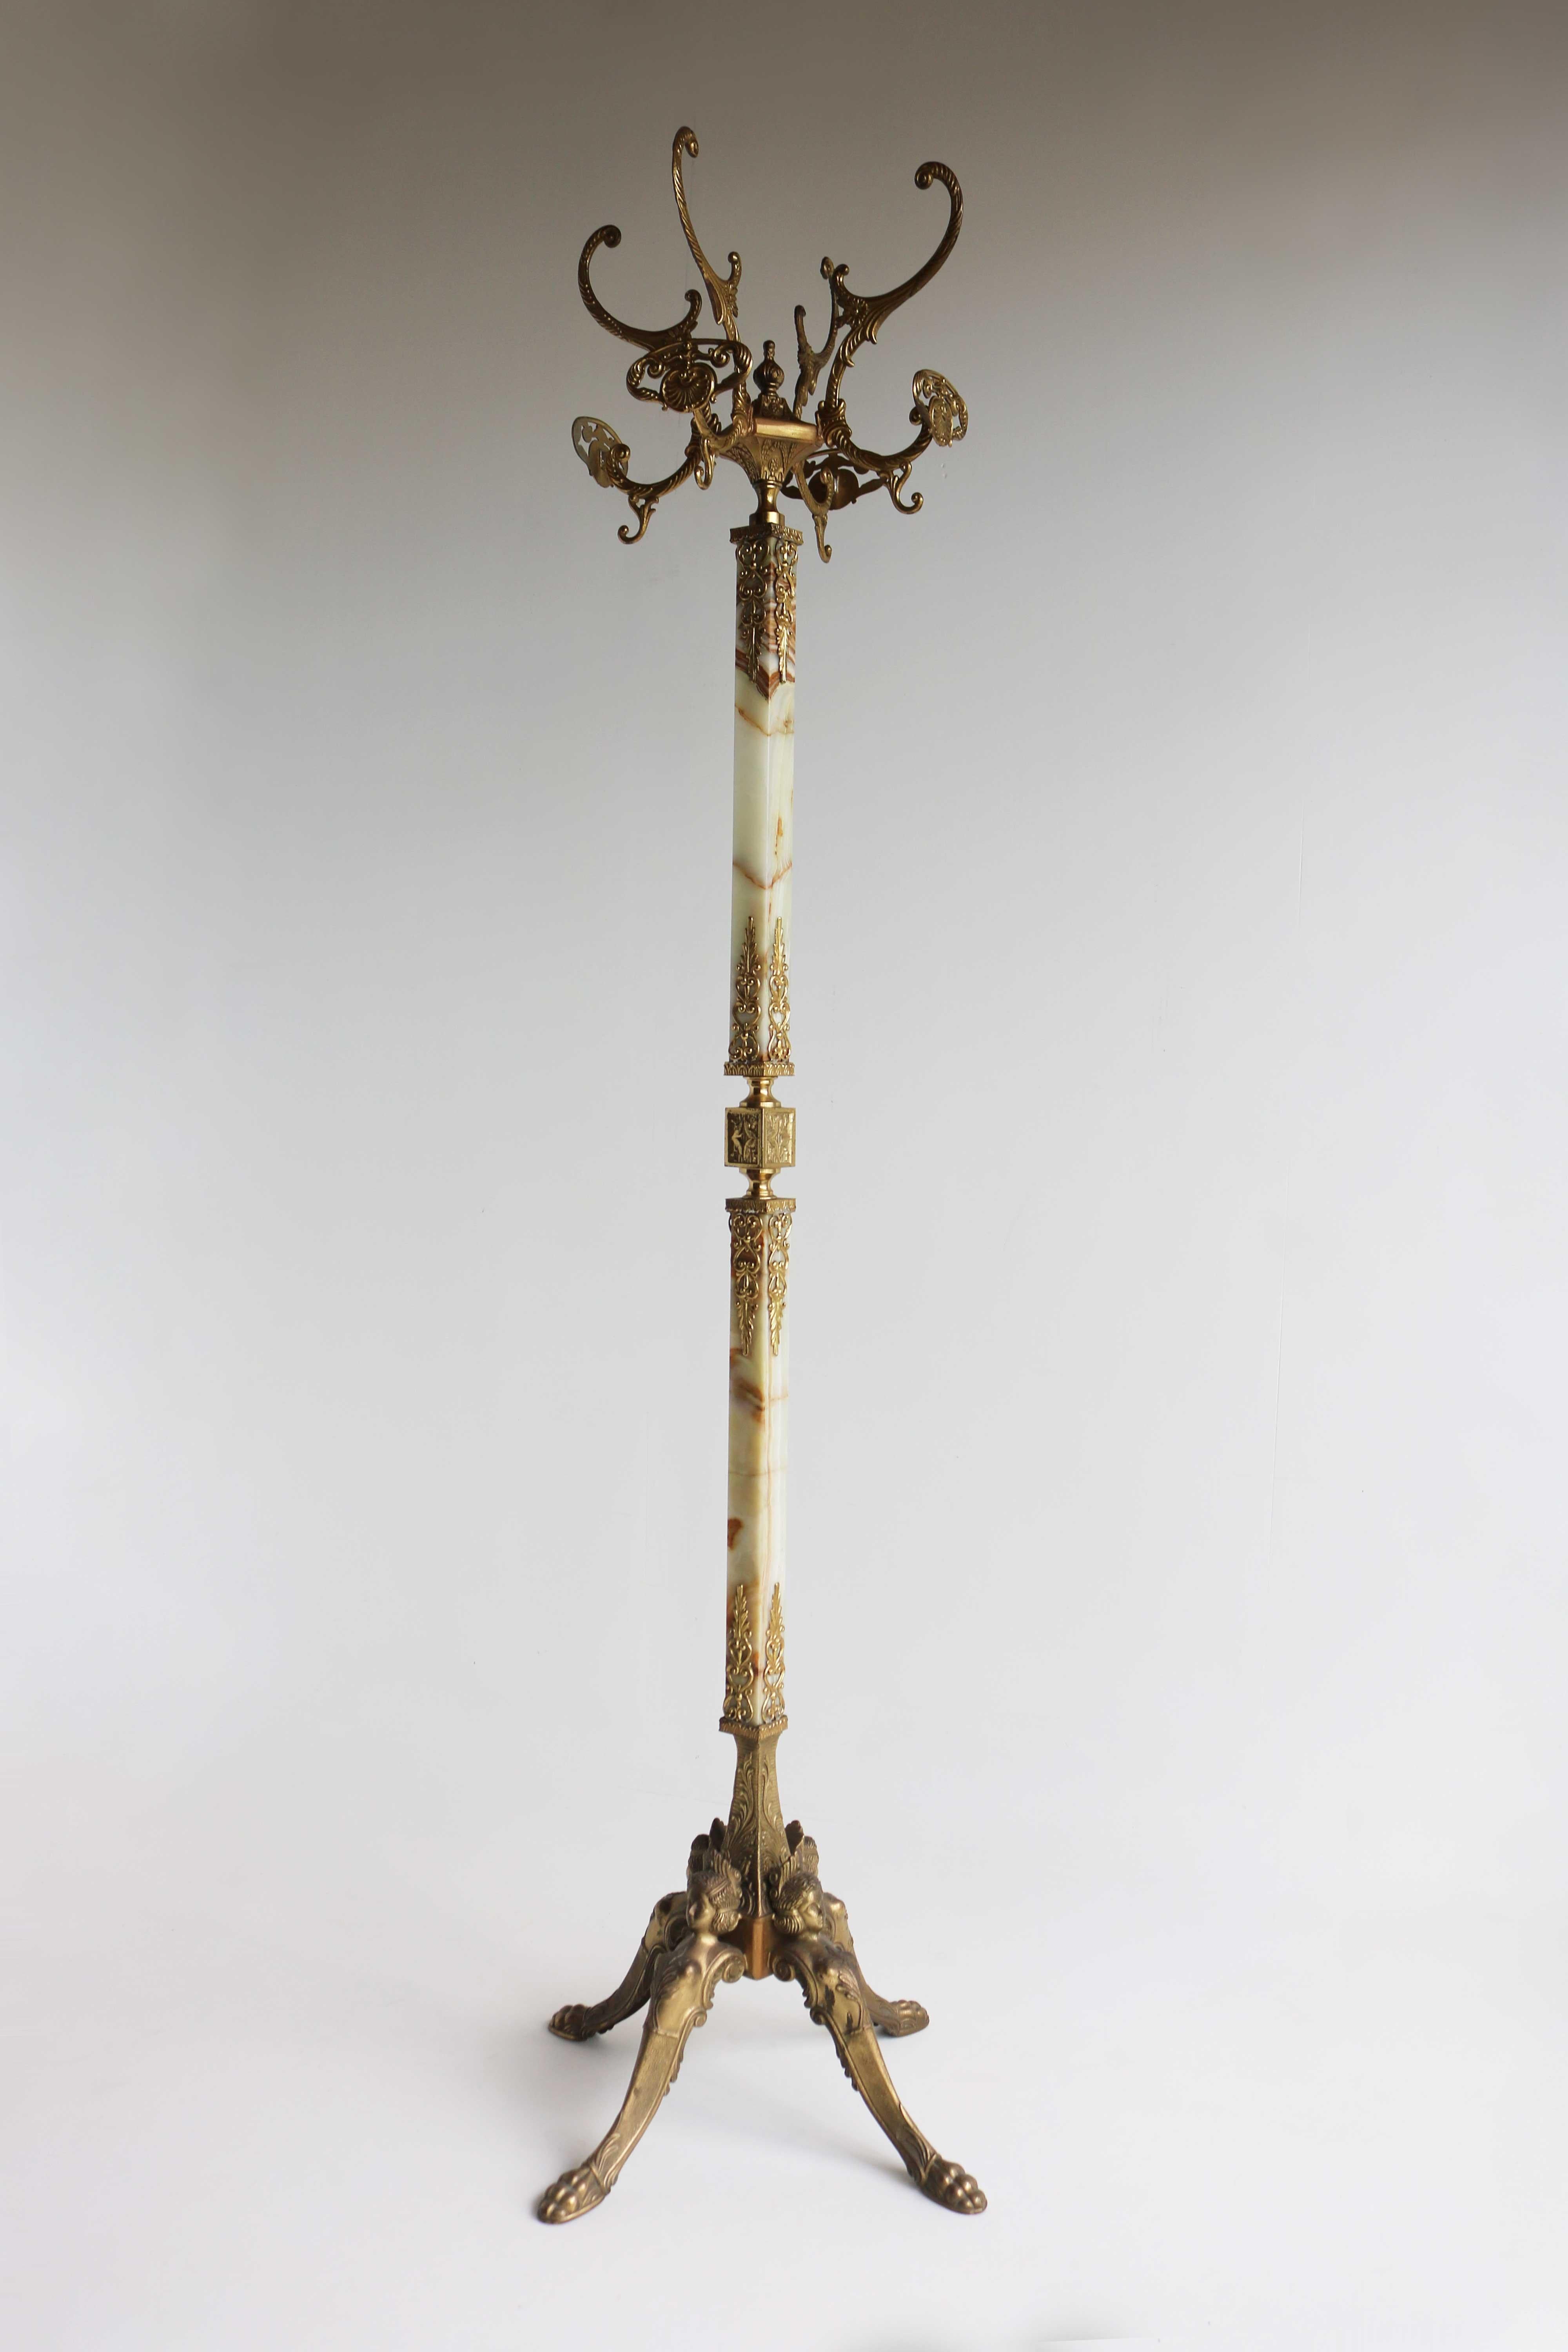 Beautiful midcentury free standing ornate onyx and brass coat stand vintage racks Italian stands hat rack antique style hall tree 1950s

This elegant antique style brass and marble hall tree was crafted in Italy, circa 1950.
Is crafted from onyx